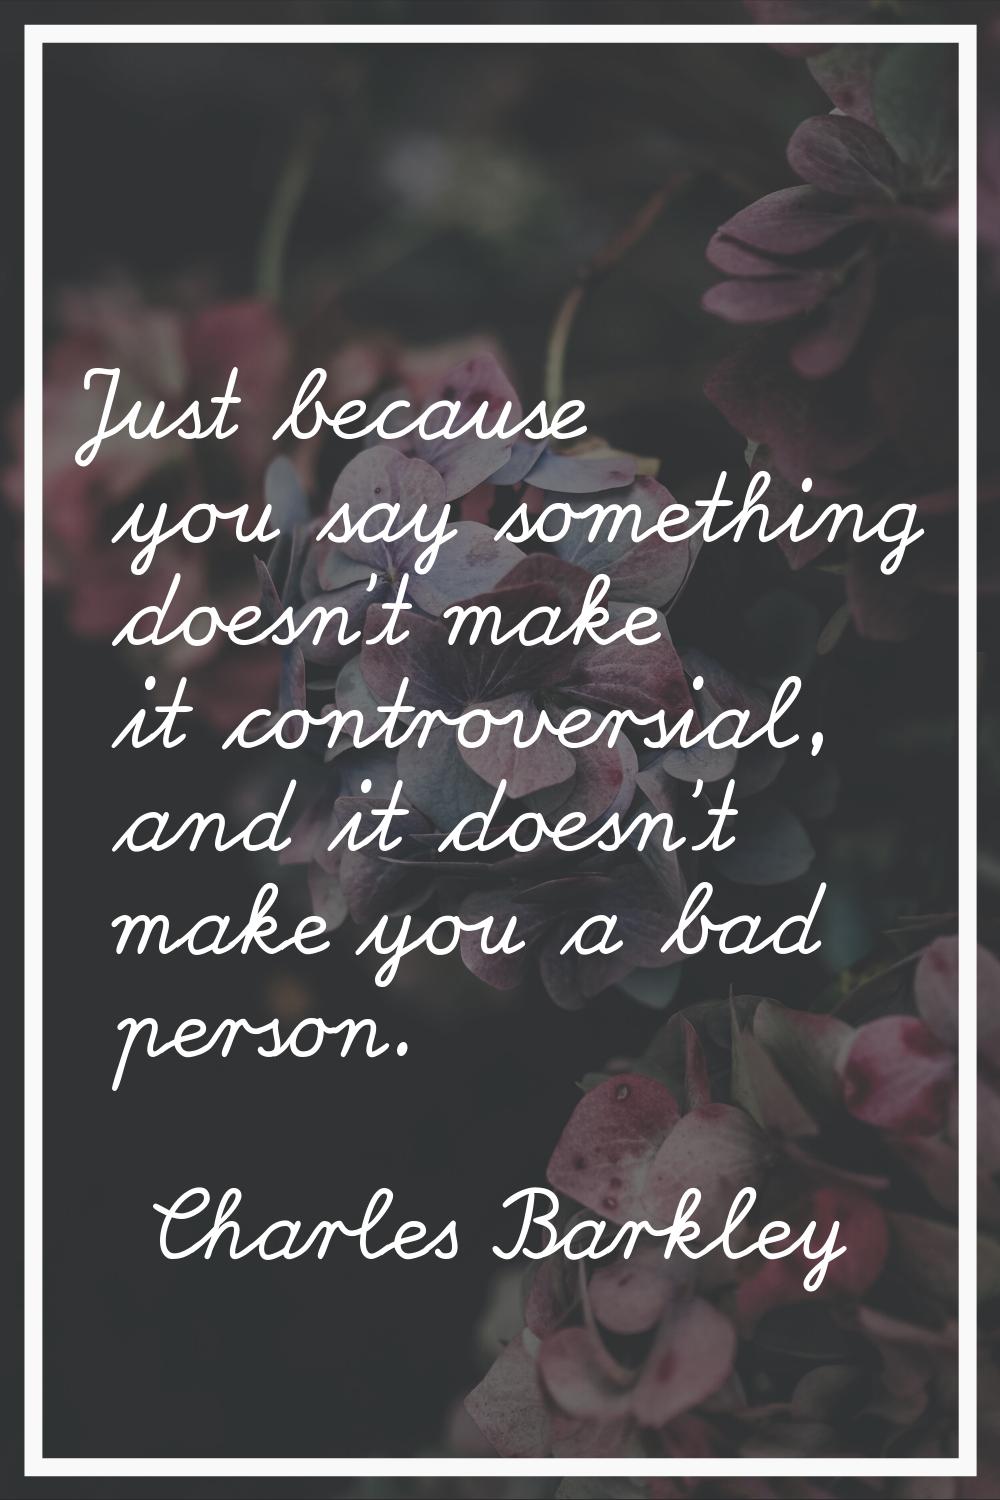 Just because you say something doesn't make it controversial, and it doesn't make you a bad person.